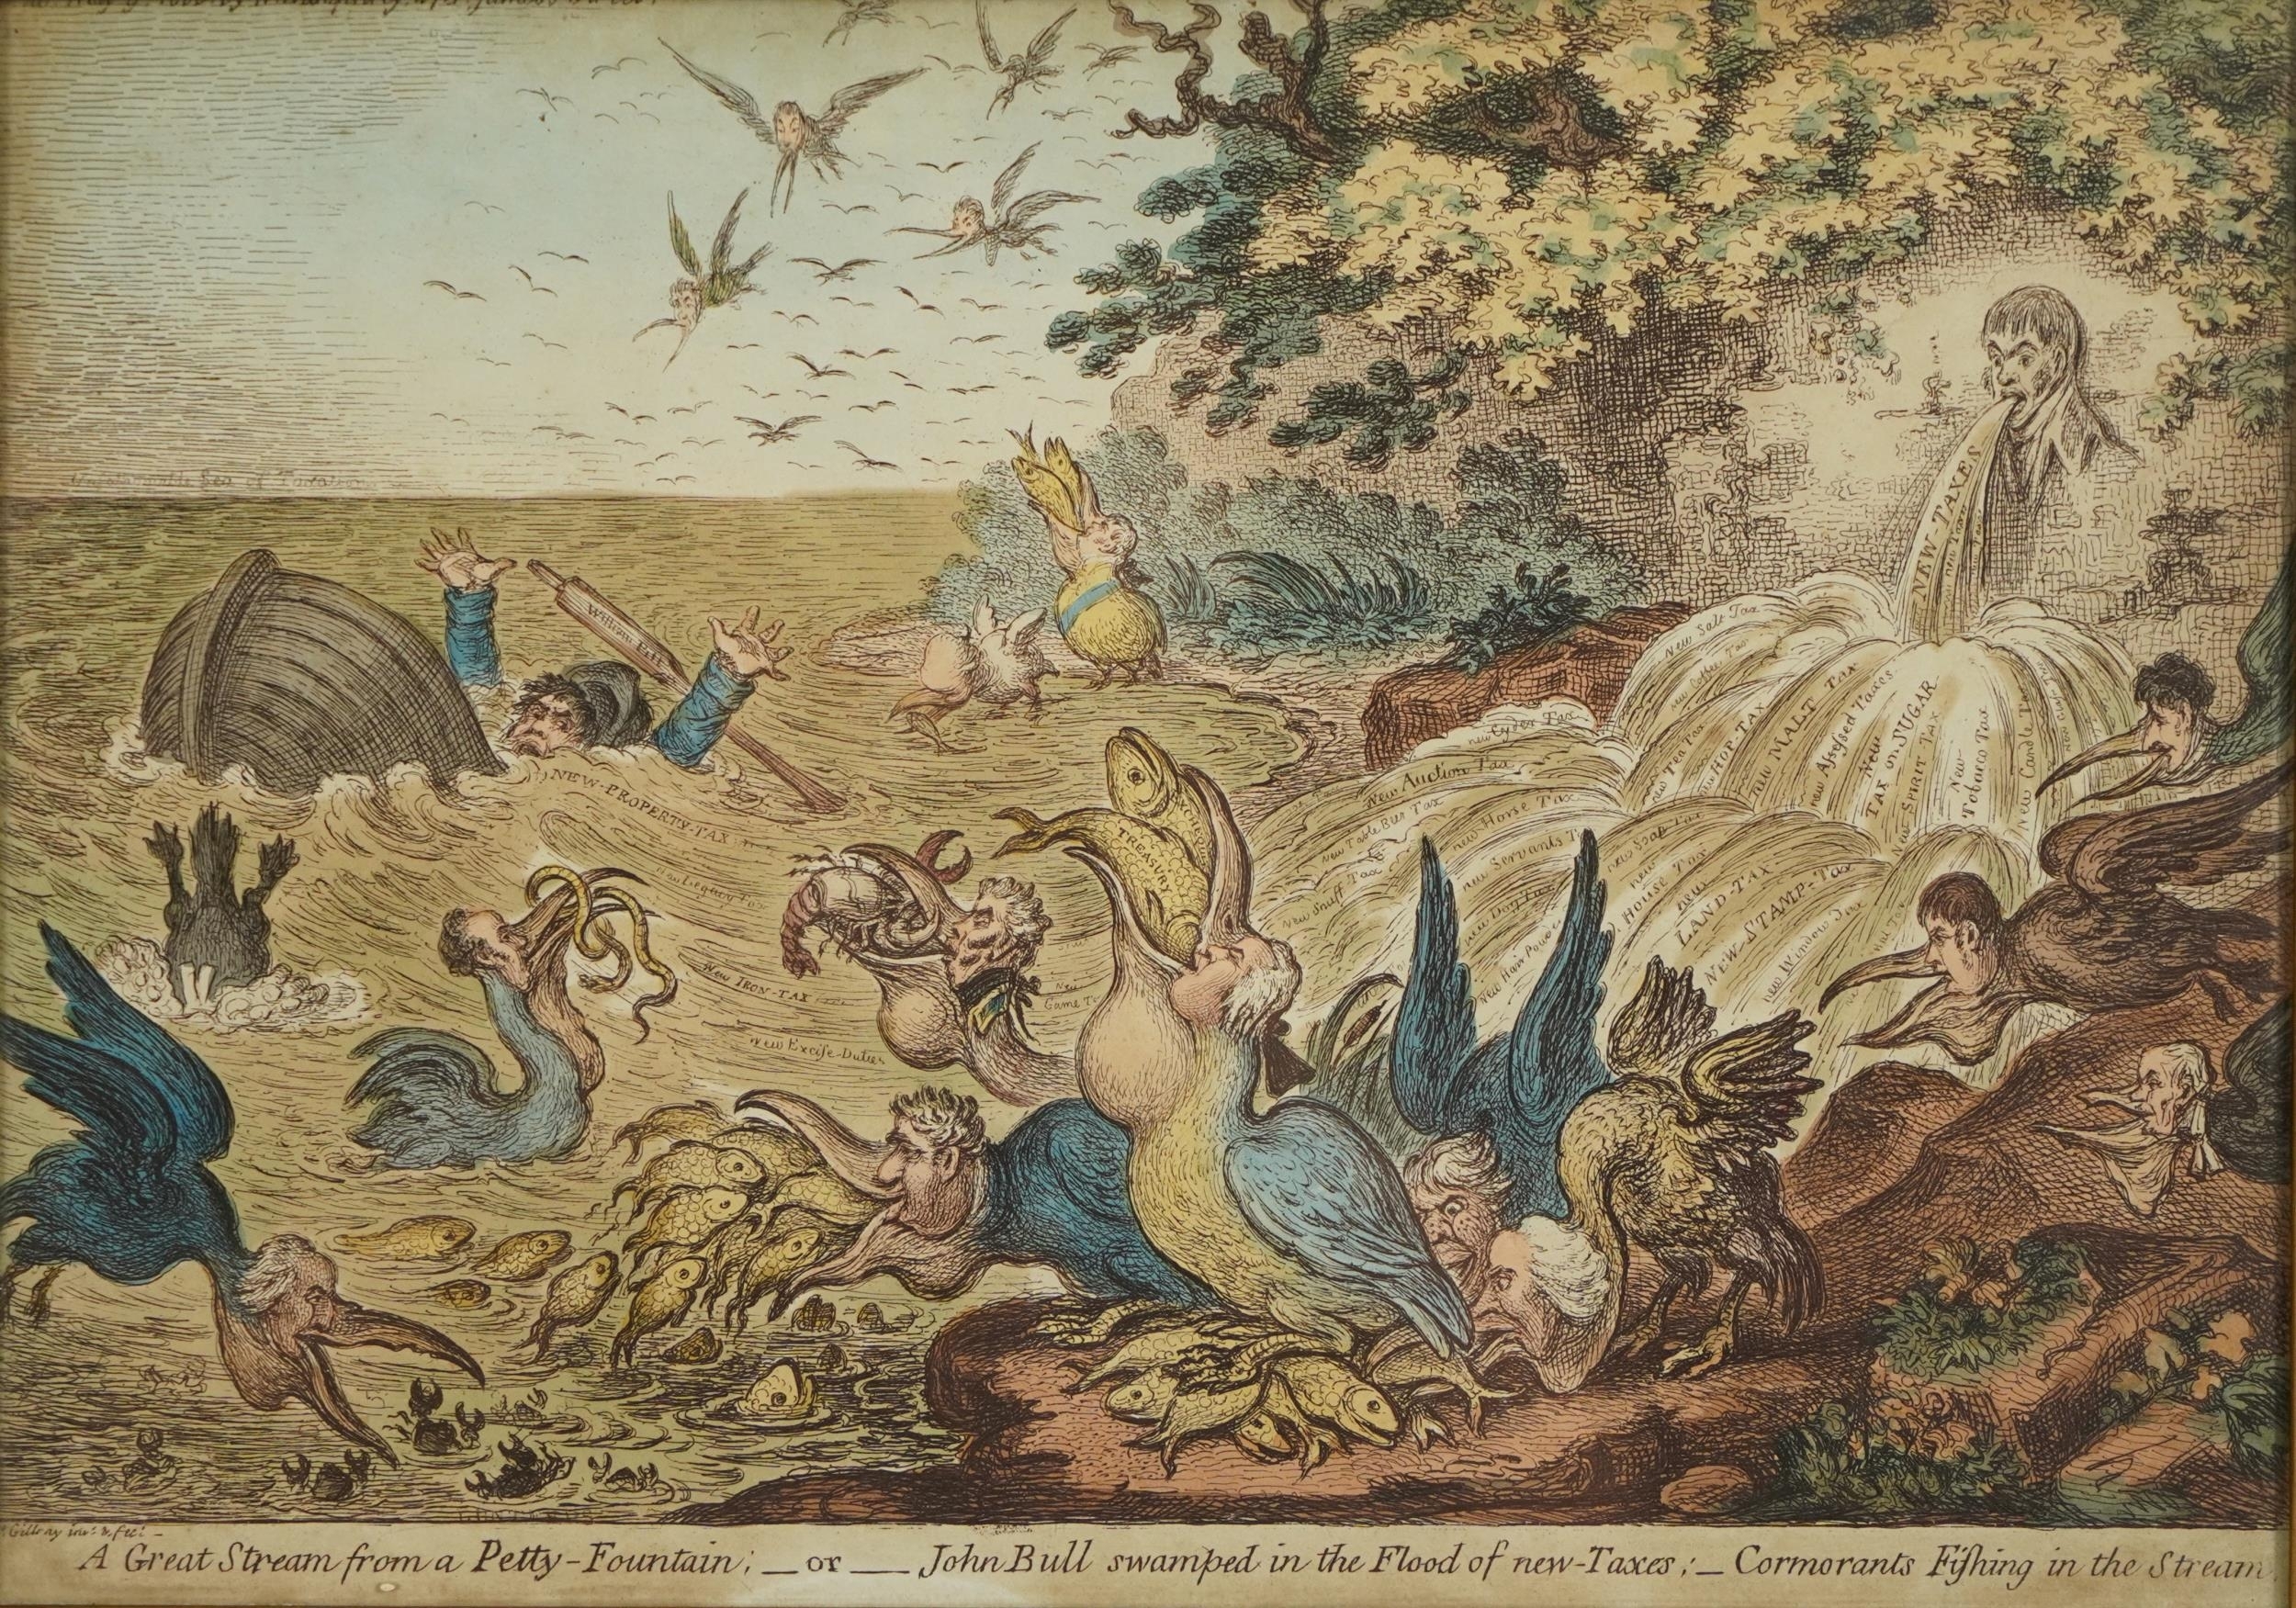 A Great Stream from a Petty Fountain or John Bull Swamped in the Flood of New Taxes by James Gillray